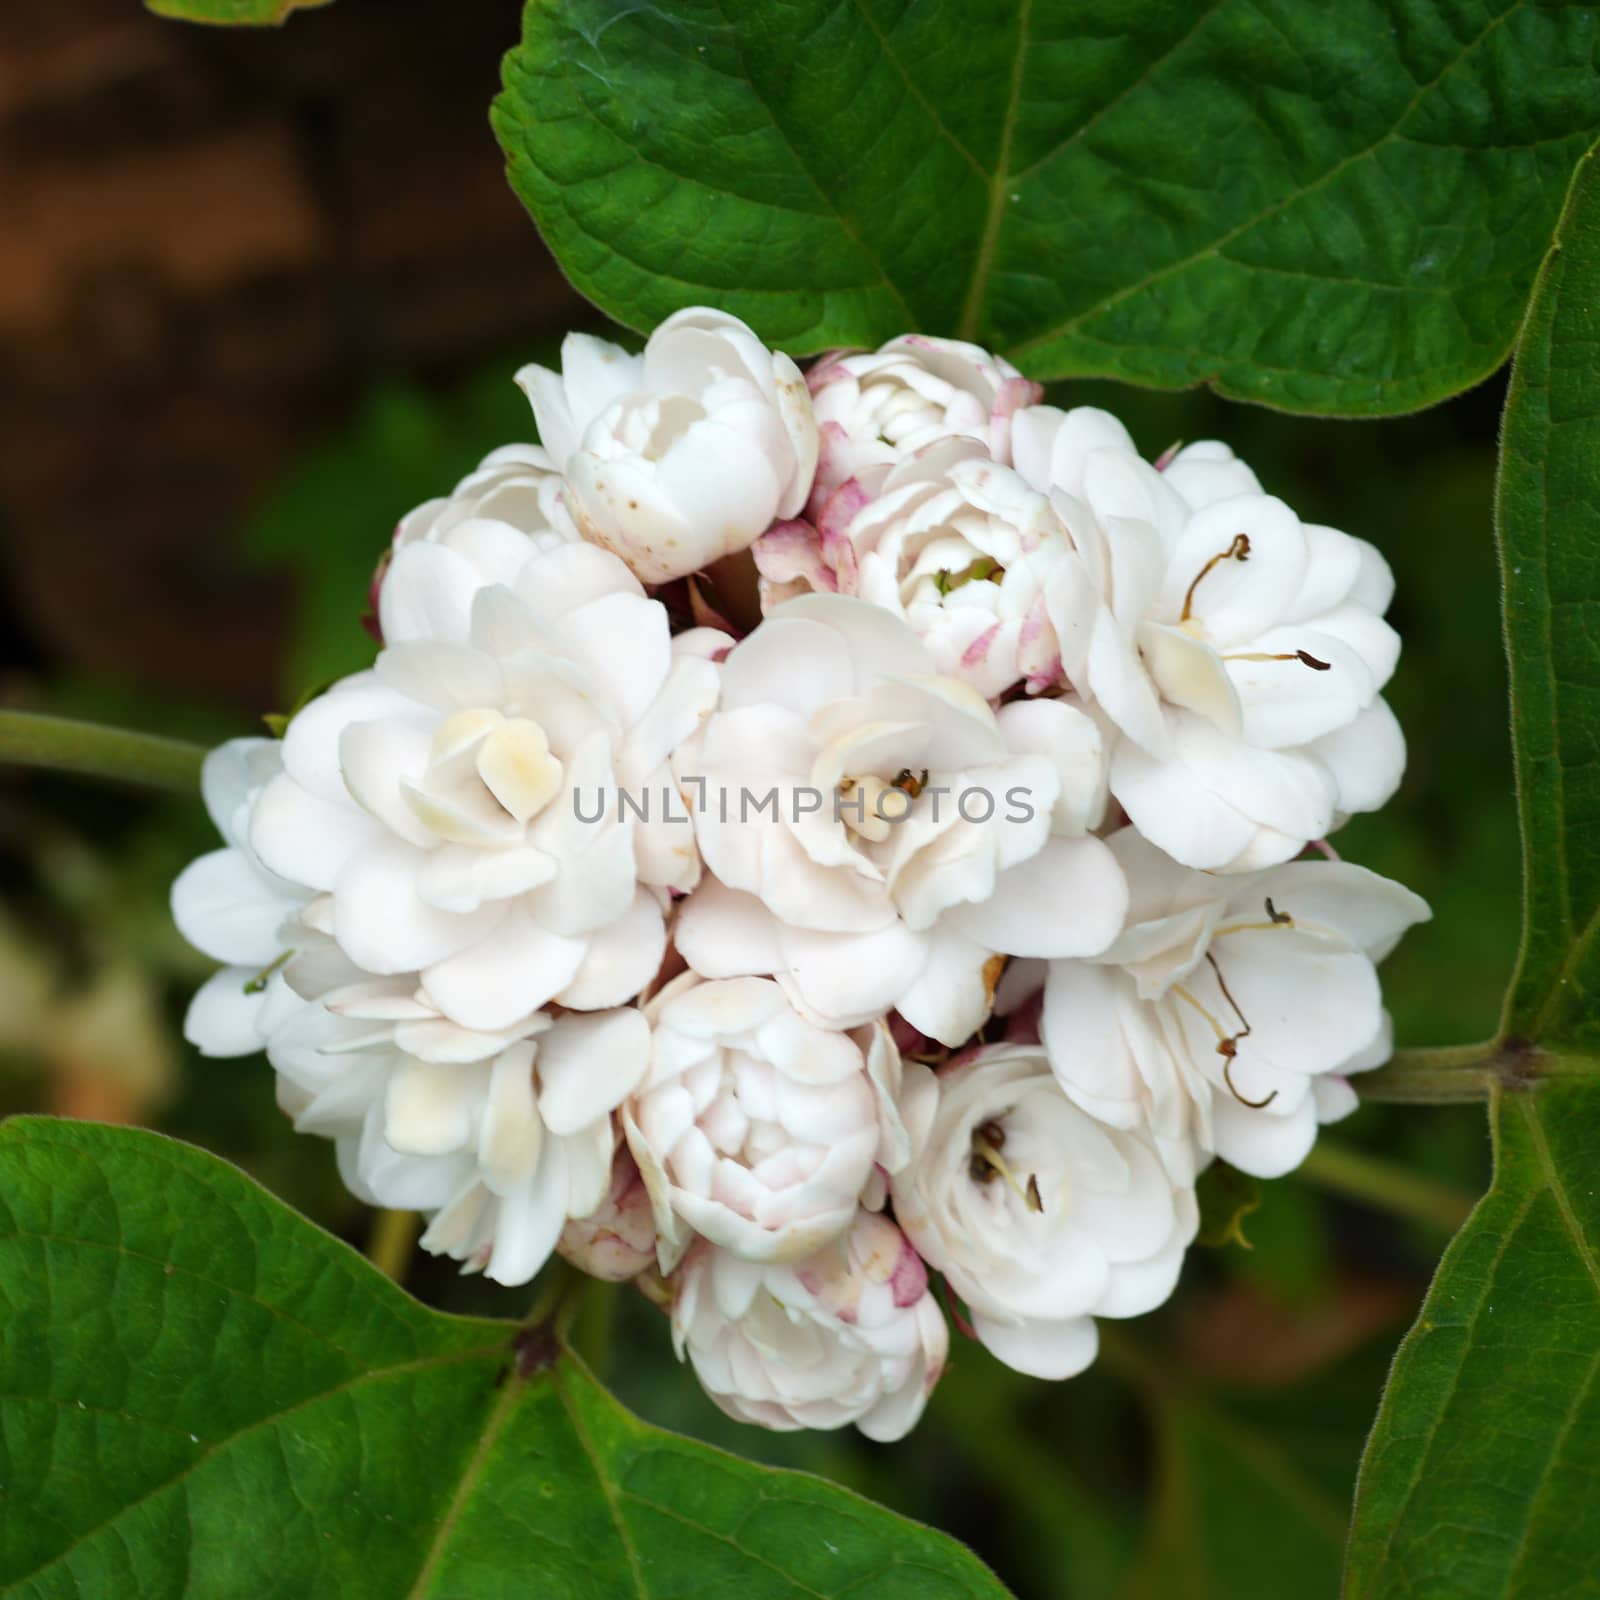 Blooming rose clerodendrum (Clerodendrum fragrans) flower.